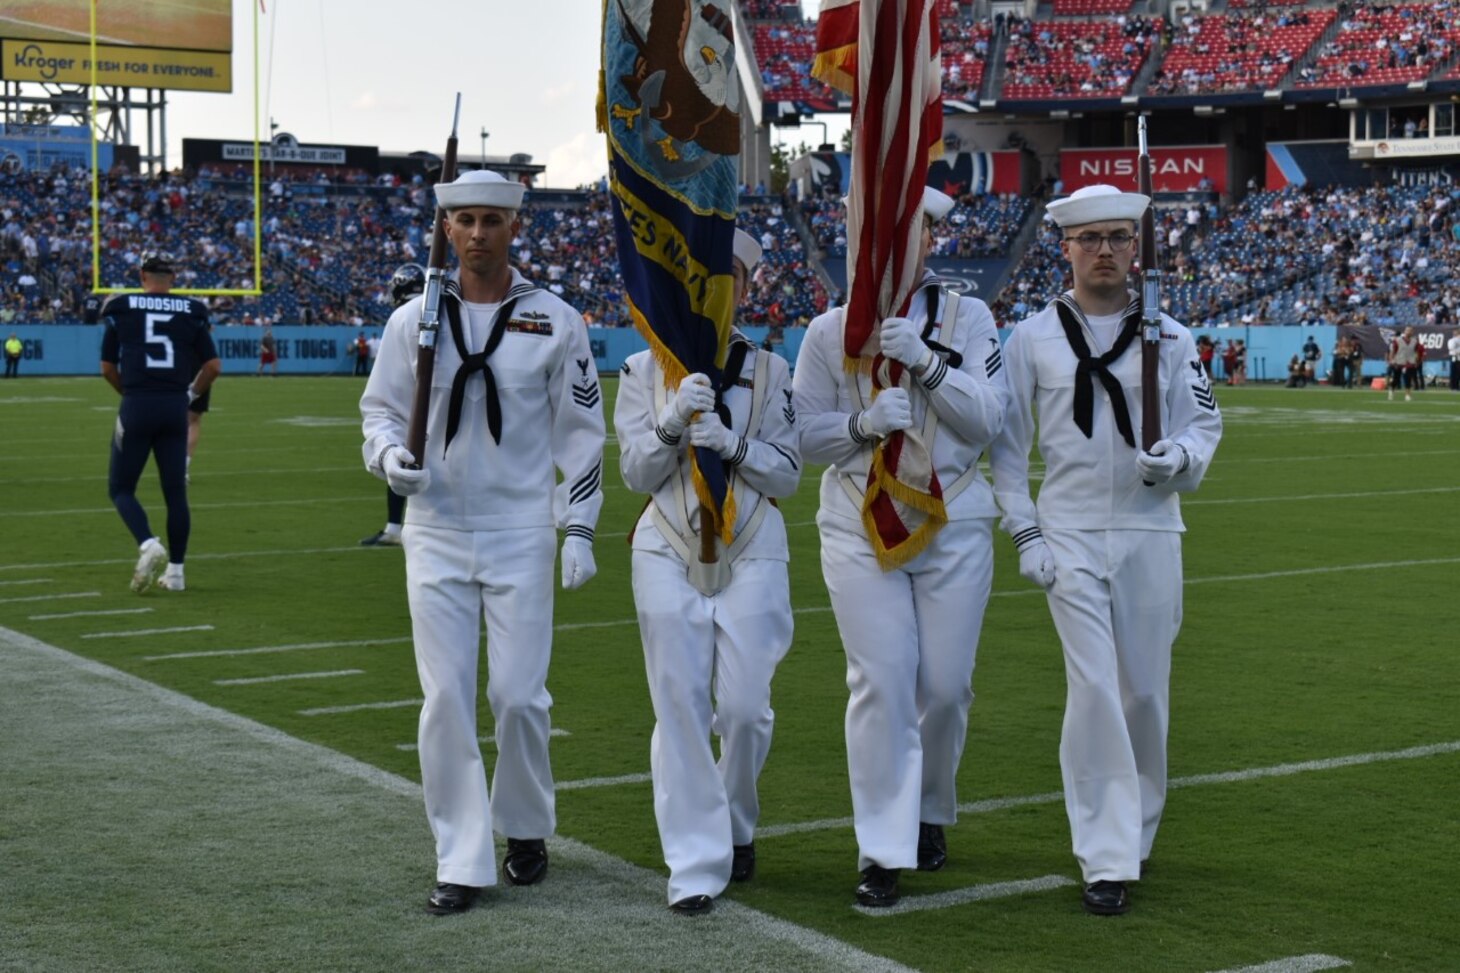 NRC Nashville color guard performs at a Tennessee Titans game.